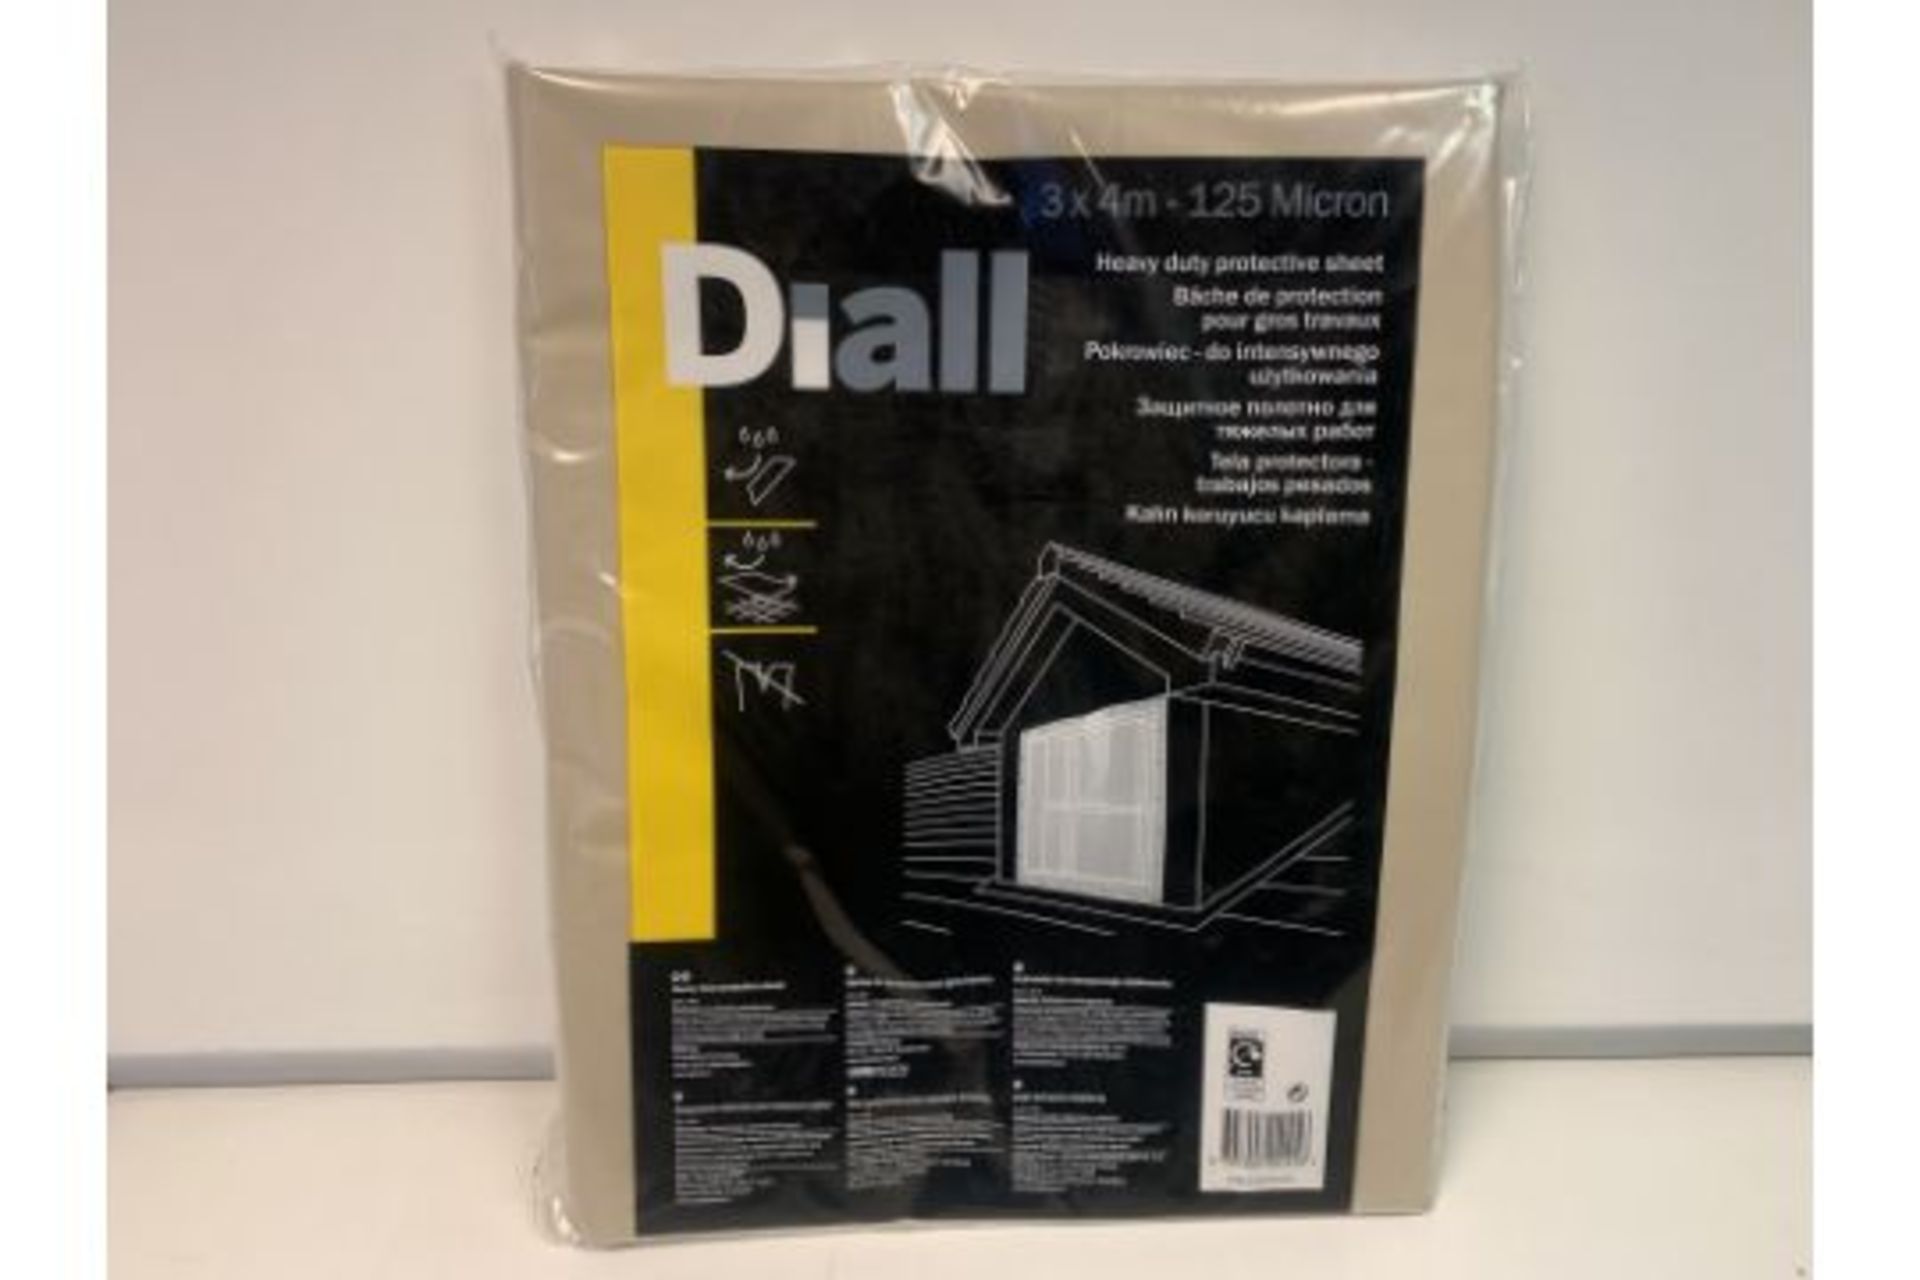 20 X NEW PACKAGED DIALL 3x4M 125 MICRON HEAVY DUTY PROTECTIVE SHEETS (ROW10/11)